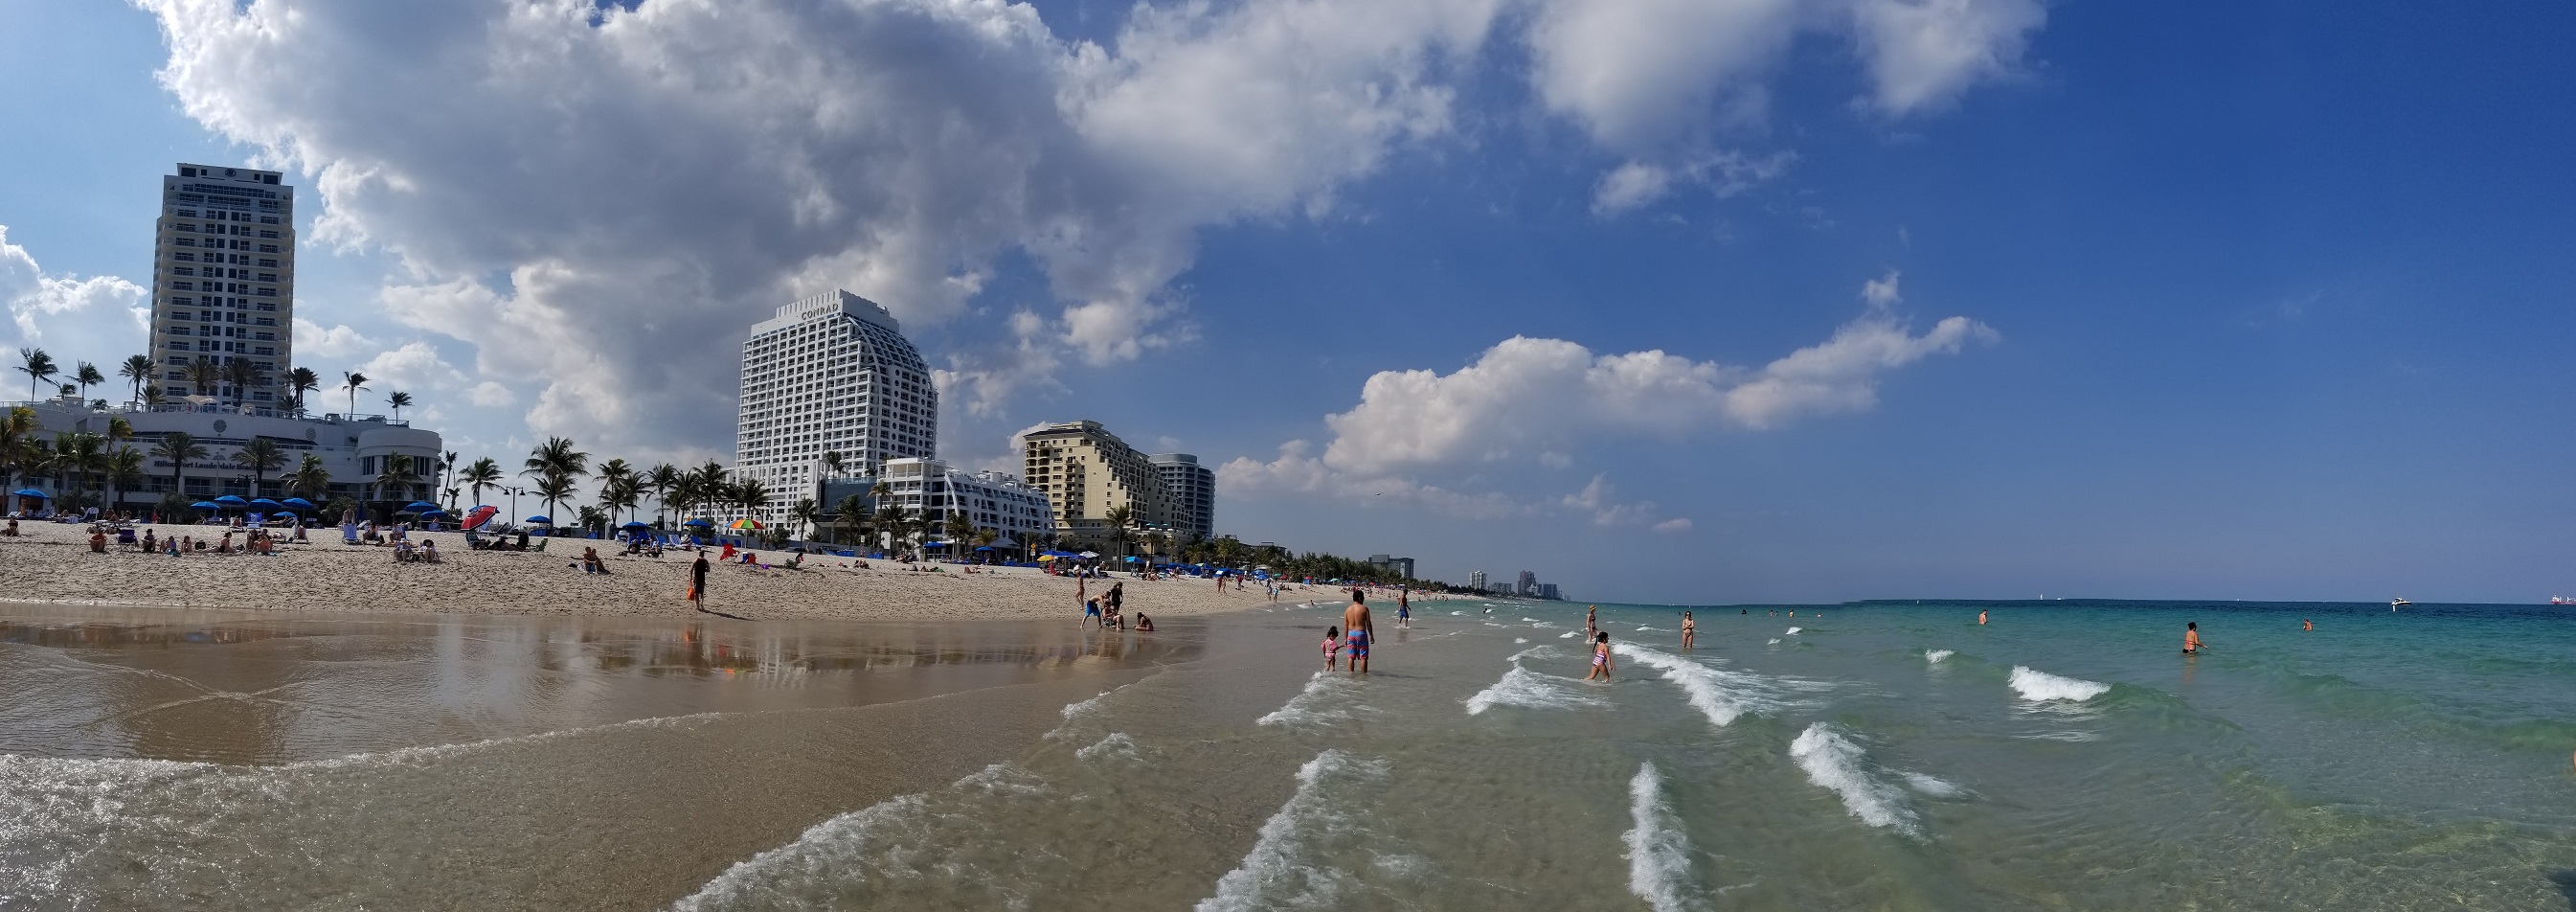 What is up with the ocean in Fort Lauderdale (Dania Beach ...